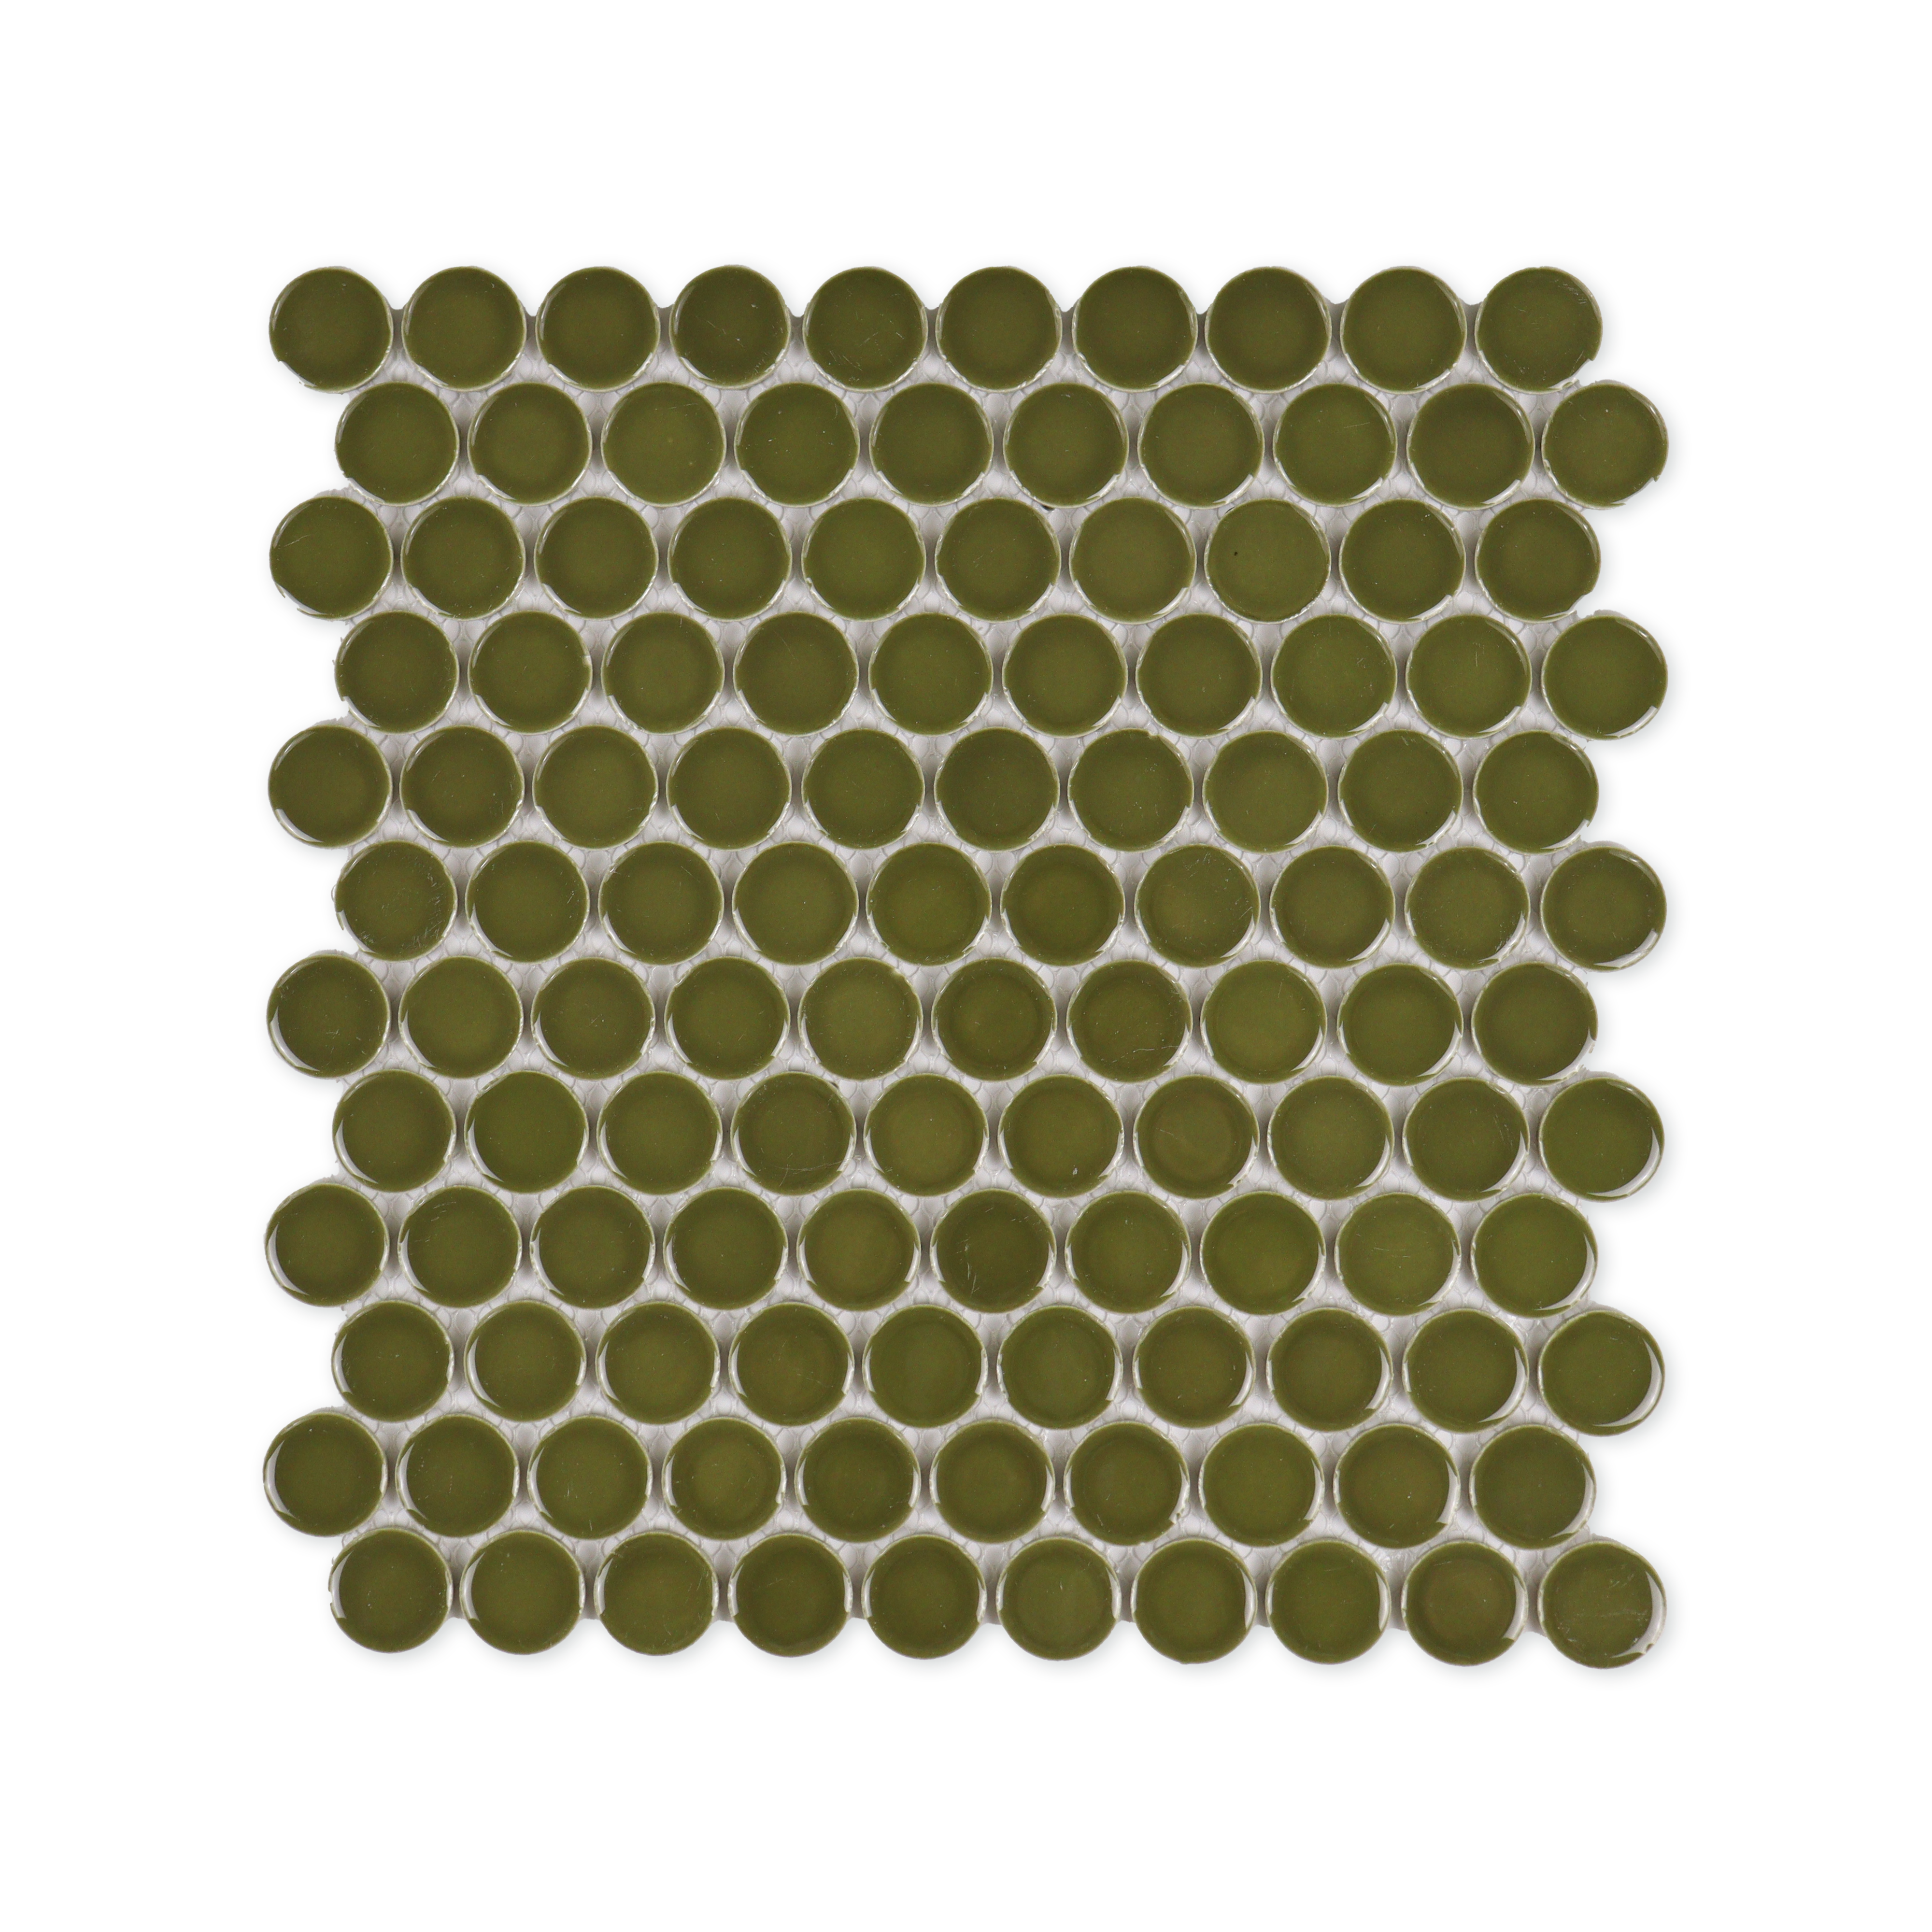 Olive Drab Green Glossy Jumbo Penny Round Mosaic Tile